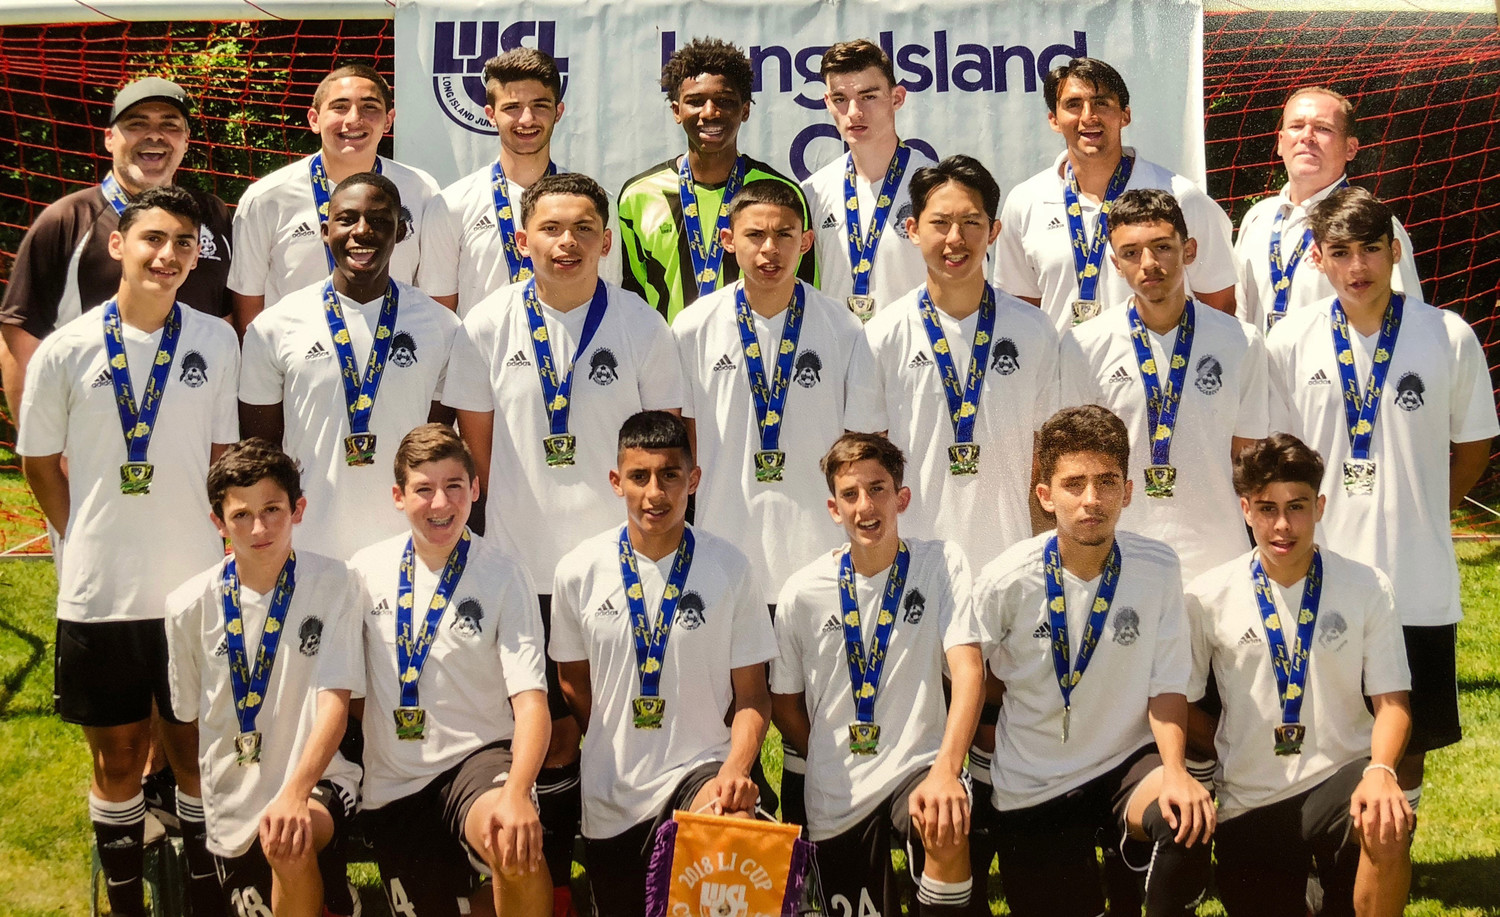 The 15-and-under Seminoles won the Long Island Junior Soccer League’s Long Island Cup.